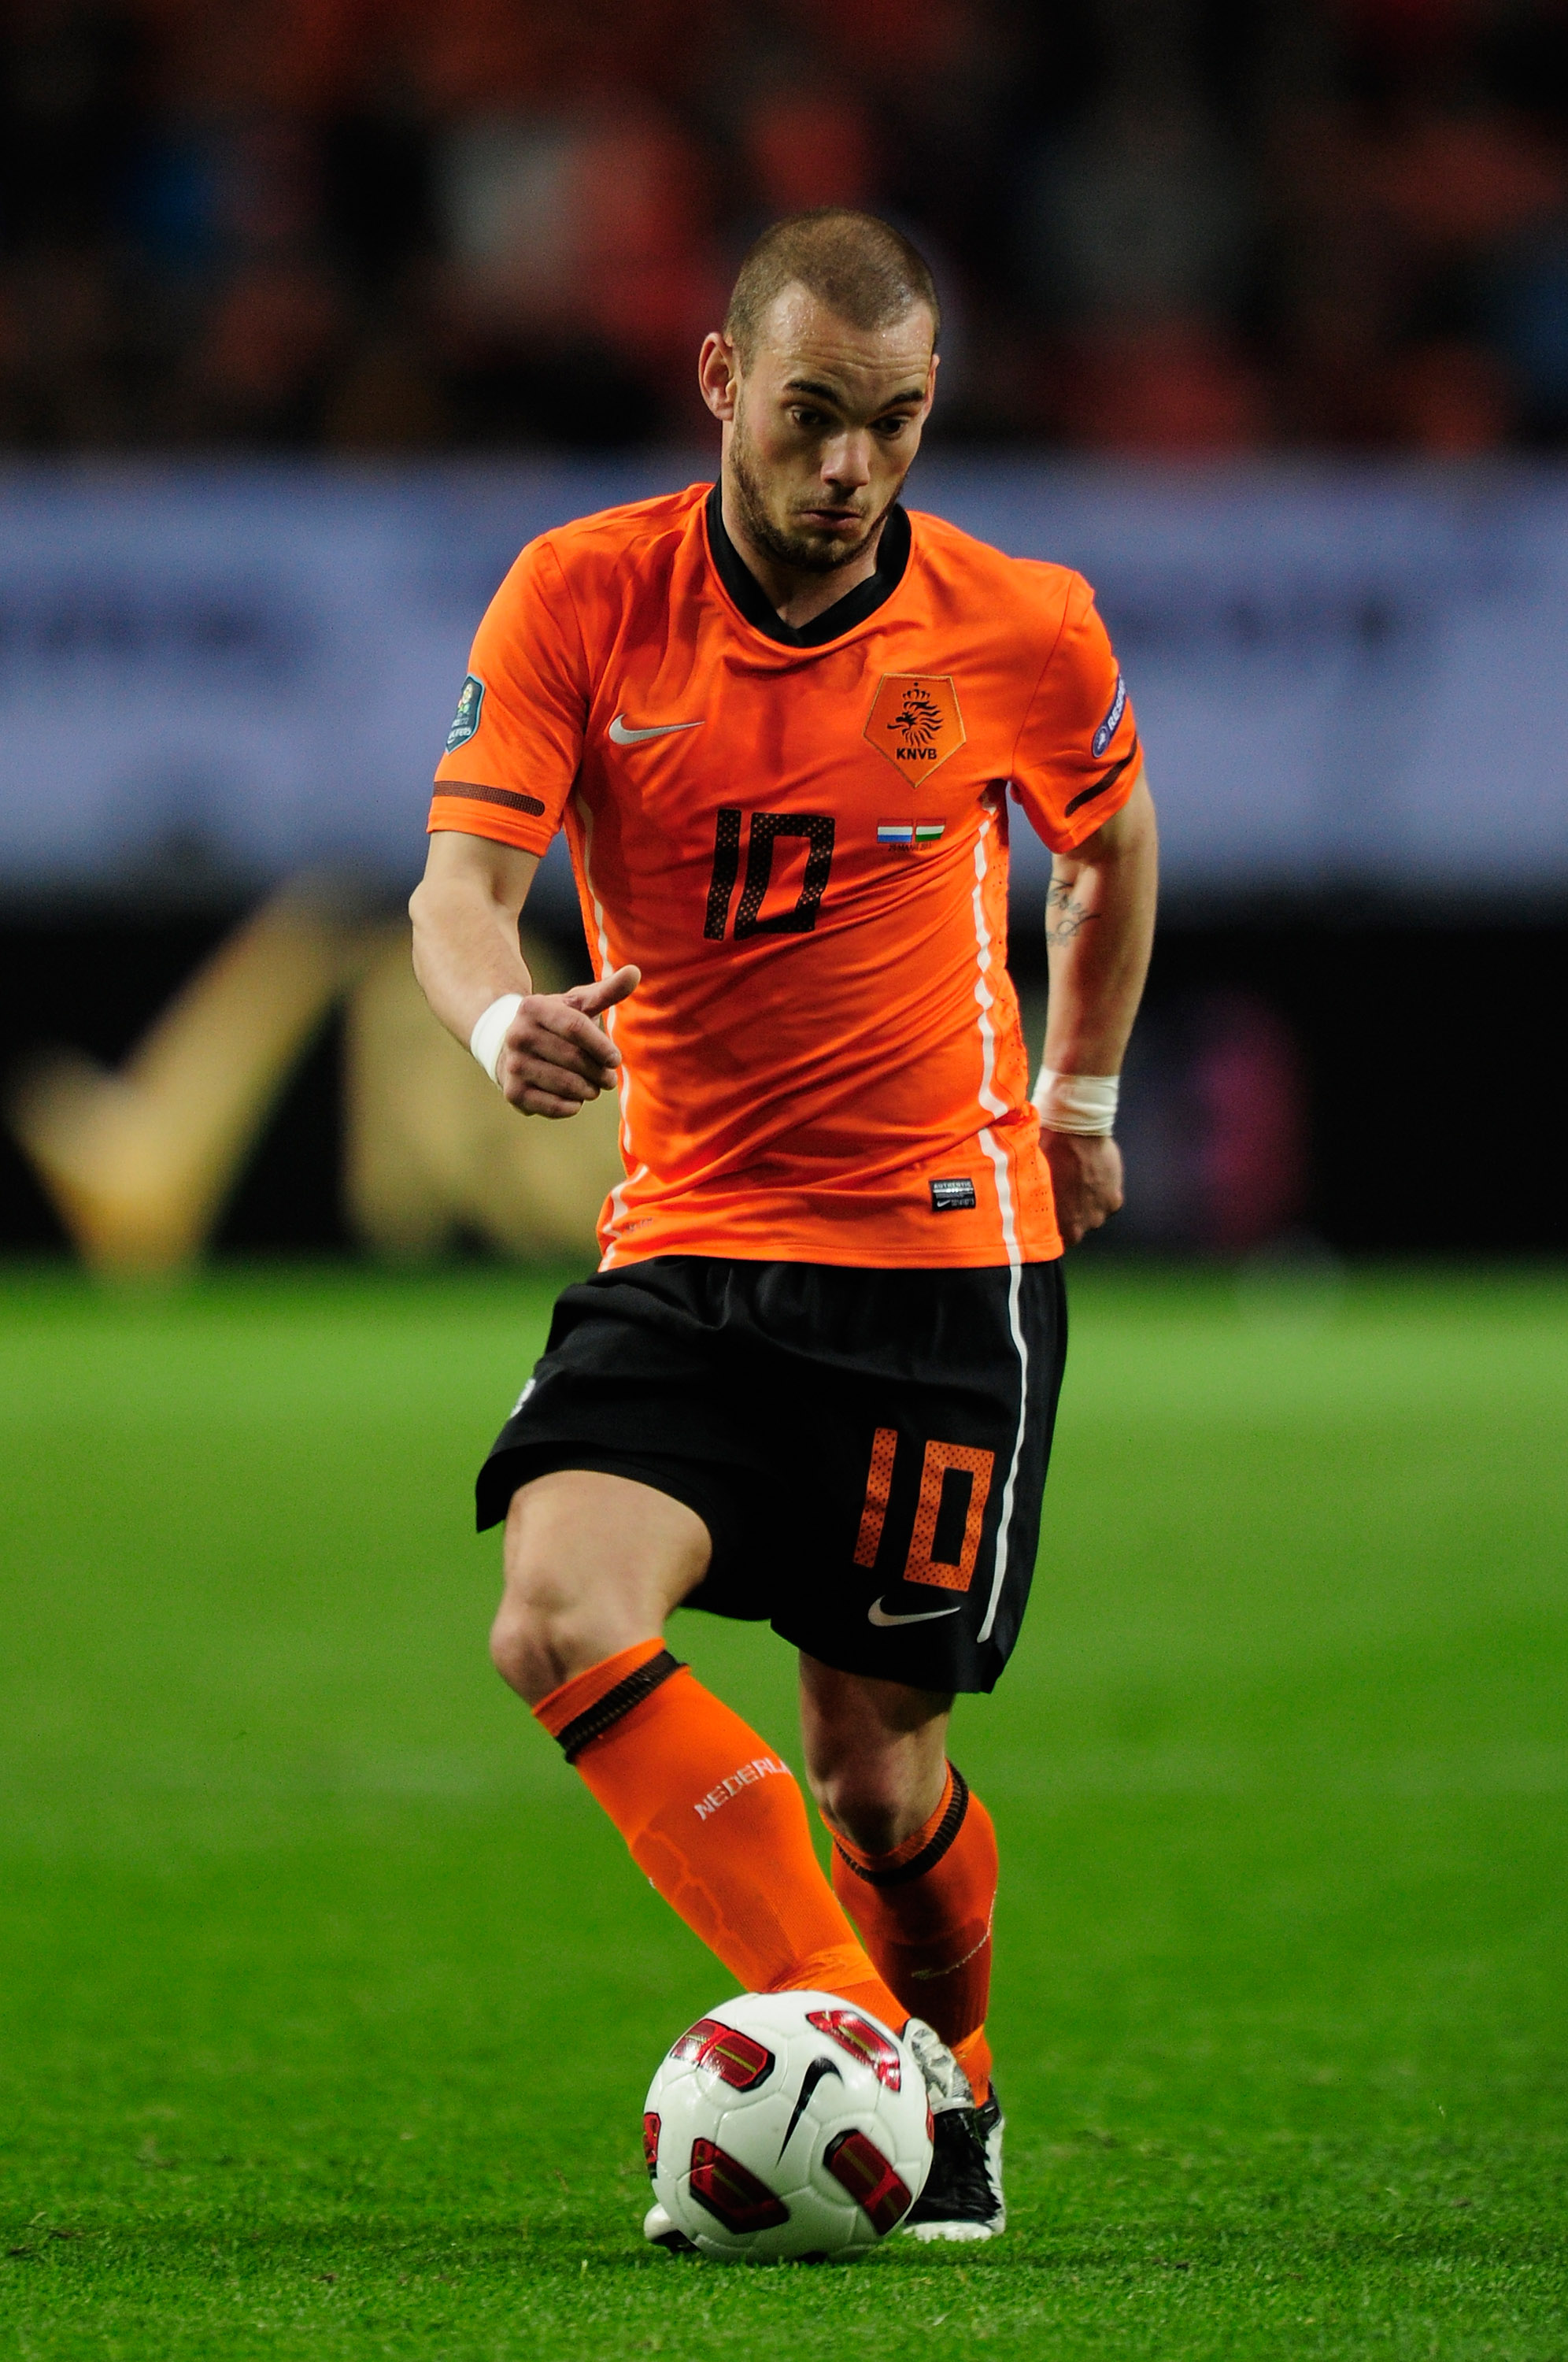 AMSTERDAM, NETHERLANDS - MARCH 29:  Wesley Sneijder of the Netherlands in action during the Group E, EURO 2012 Qualifier between Netherlands and Hungary at the Amsterdam Arena on March 29, 2011 in Amsterdam, Netherlands.  (Photo by Jamie McDonald/Getty Im